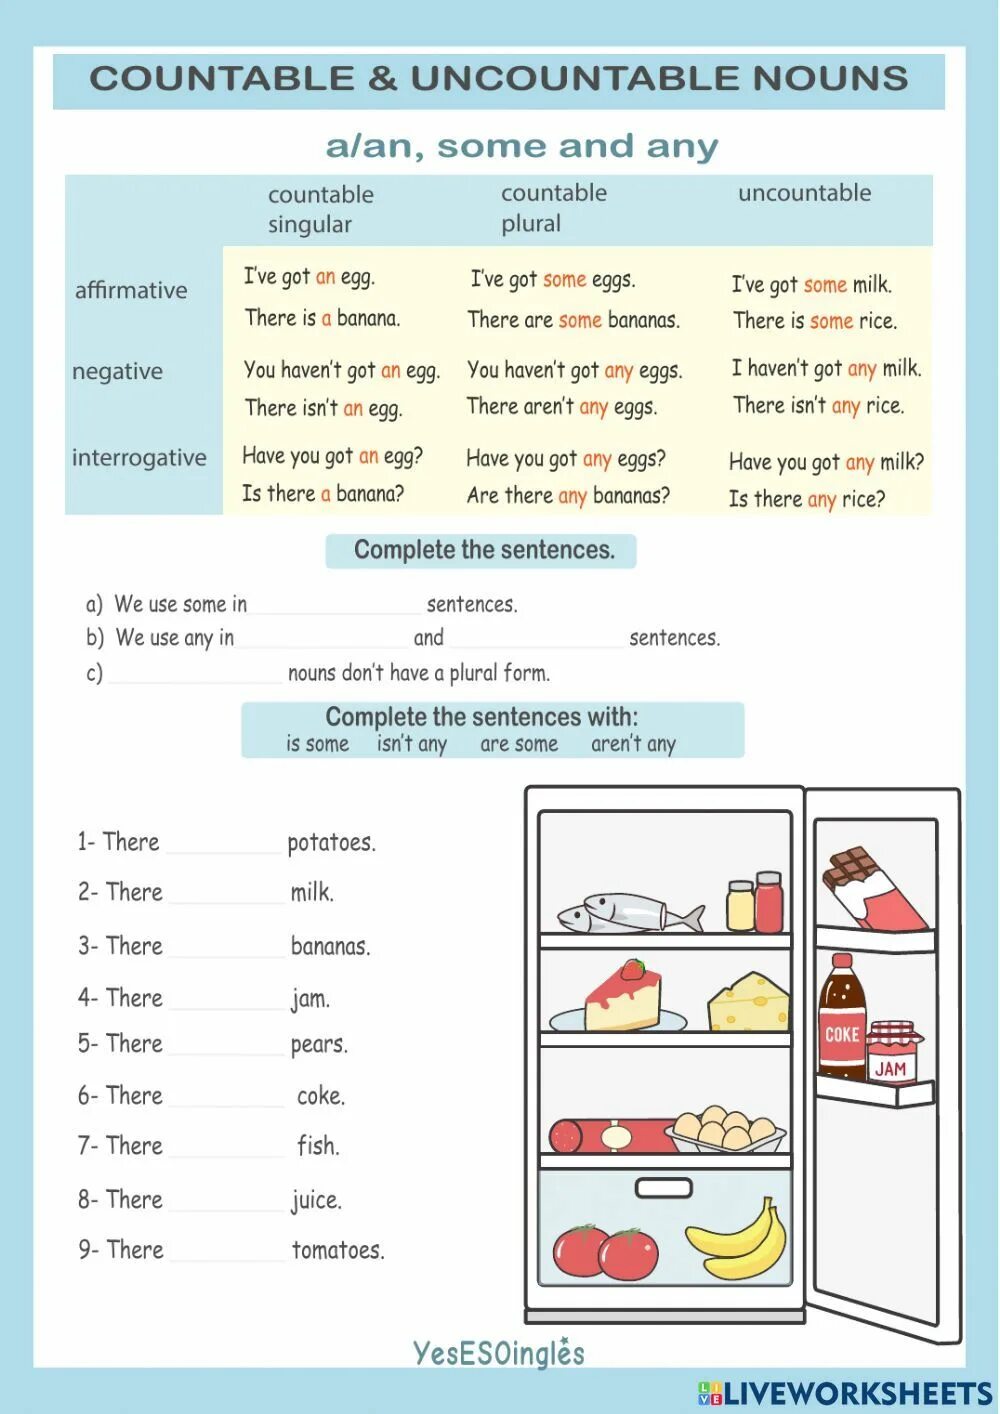 There are some eggs in the fridge. Английский countable and uncountable. Английский countable and uncountable Nouns. Countable and uncountable Nouns упражнения. Countable and uncountable Nouns правила.